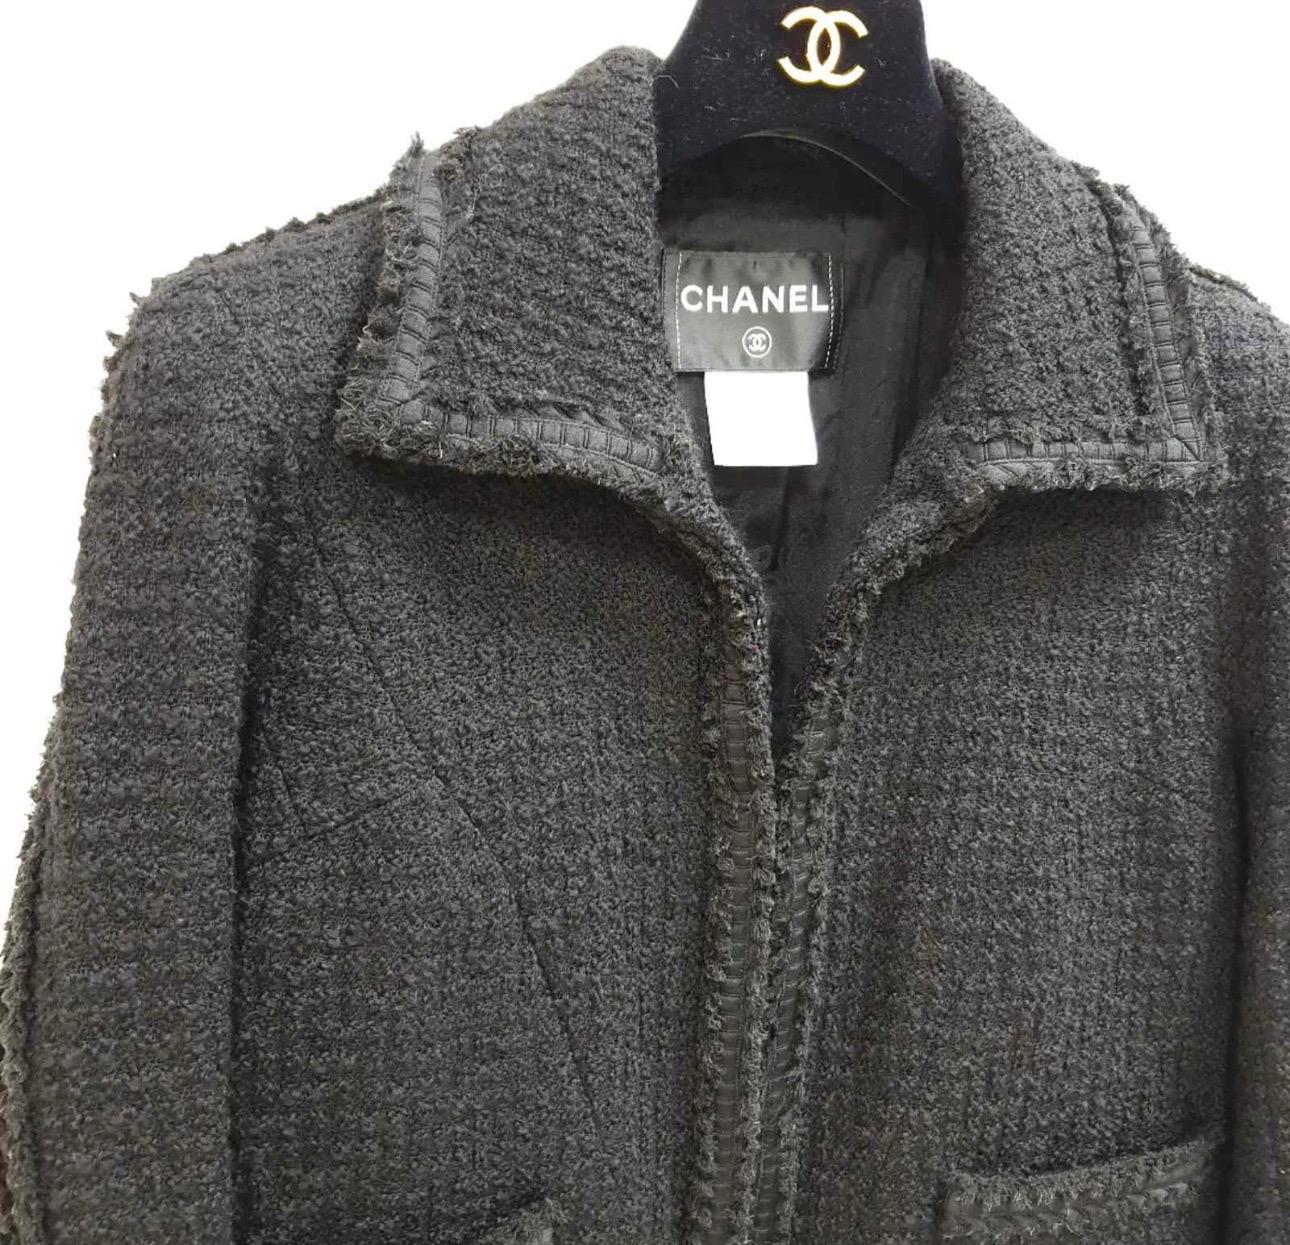 Chanel classic wool little black jacket.
Can be worn as opened front or closing with hook and eyes
Lightly padded shoulder
Two small pockets
Hook and eye closure
100% wool; 
Camellia print lining in 86% silk, 14% spandex
Sz.42 Runs smaller Fits for